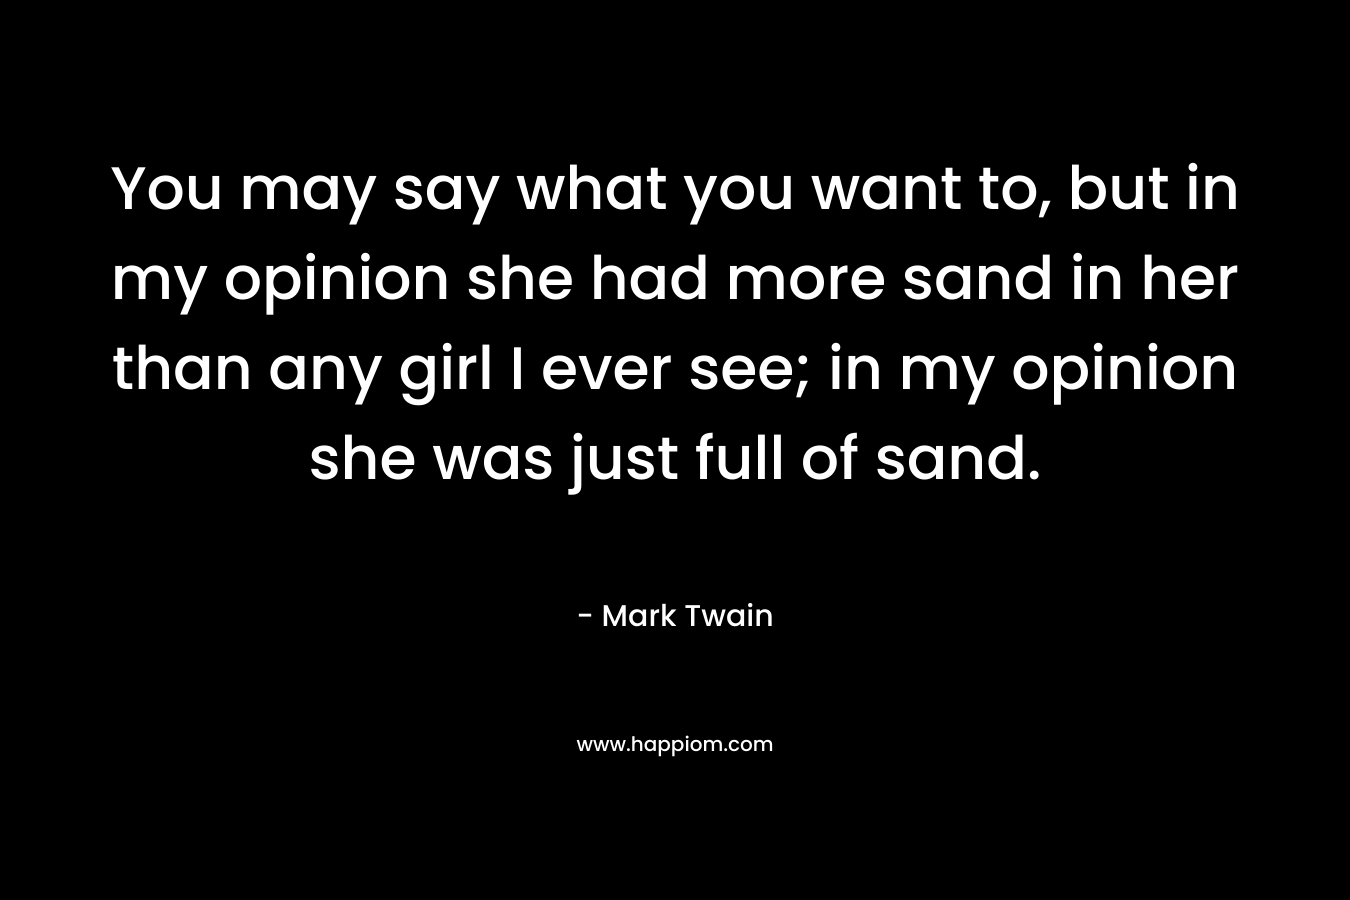 You may say what you want to, but in my opinion she had more sand in her than any girl I ever see; in my opinion she was just full of sand.